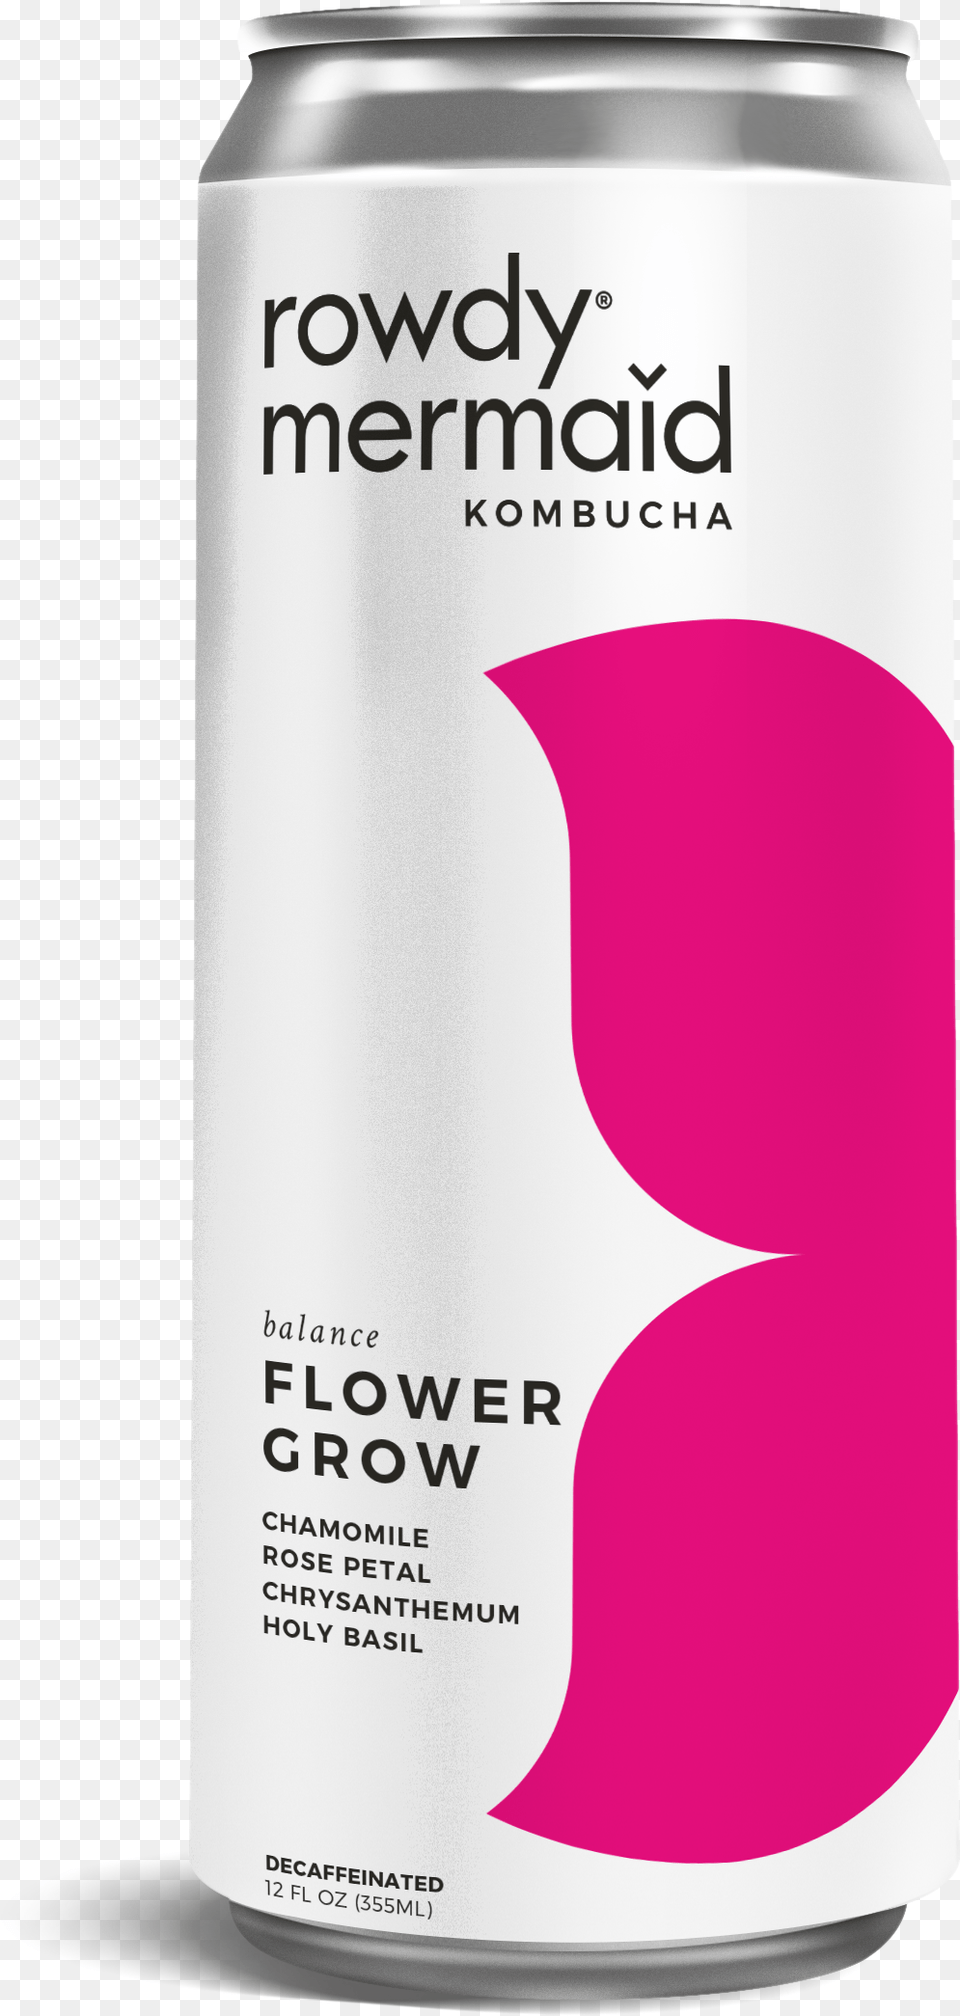 Flower Growclass Lazyload Lazyload Fade In Cloudzoom Rowdy Mermaid Kombucha Strawberry Tonic, Can, Tin Png Image